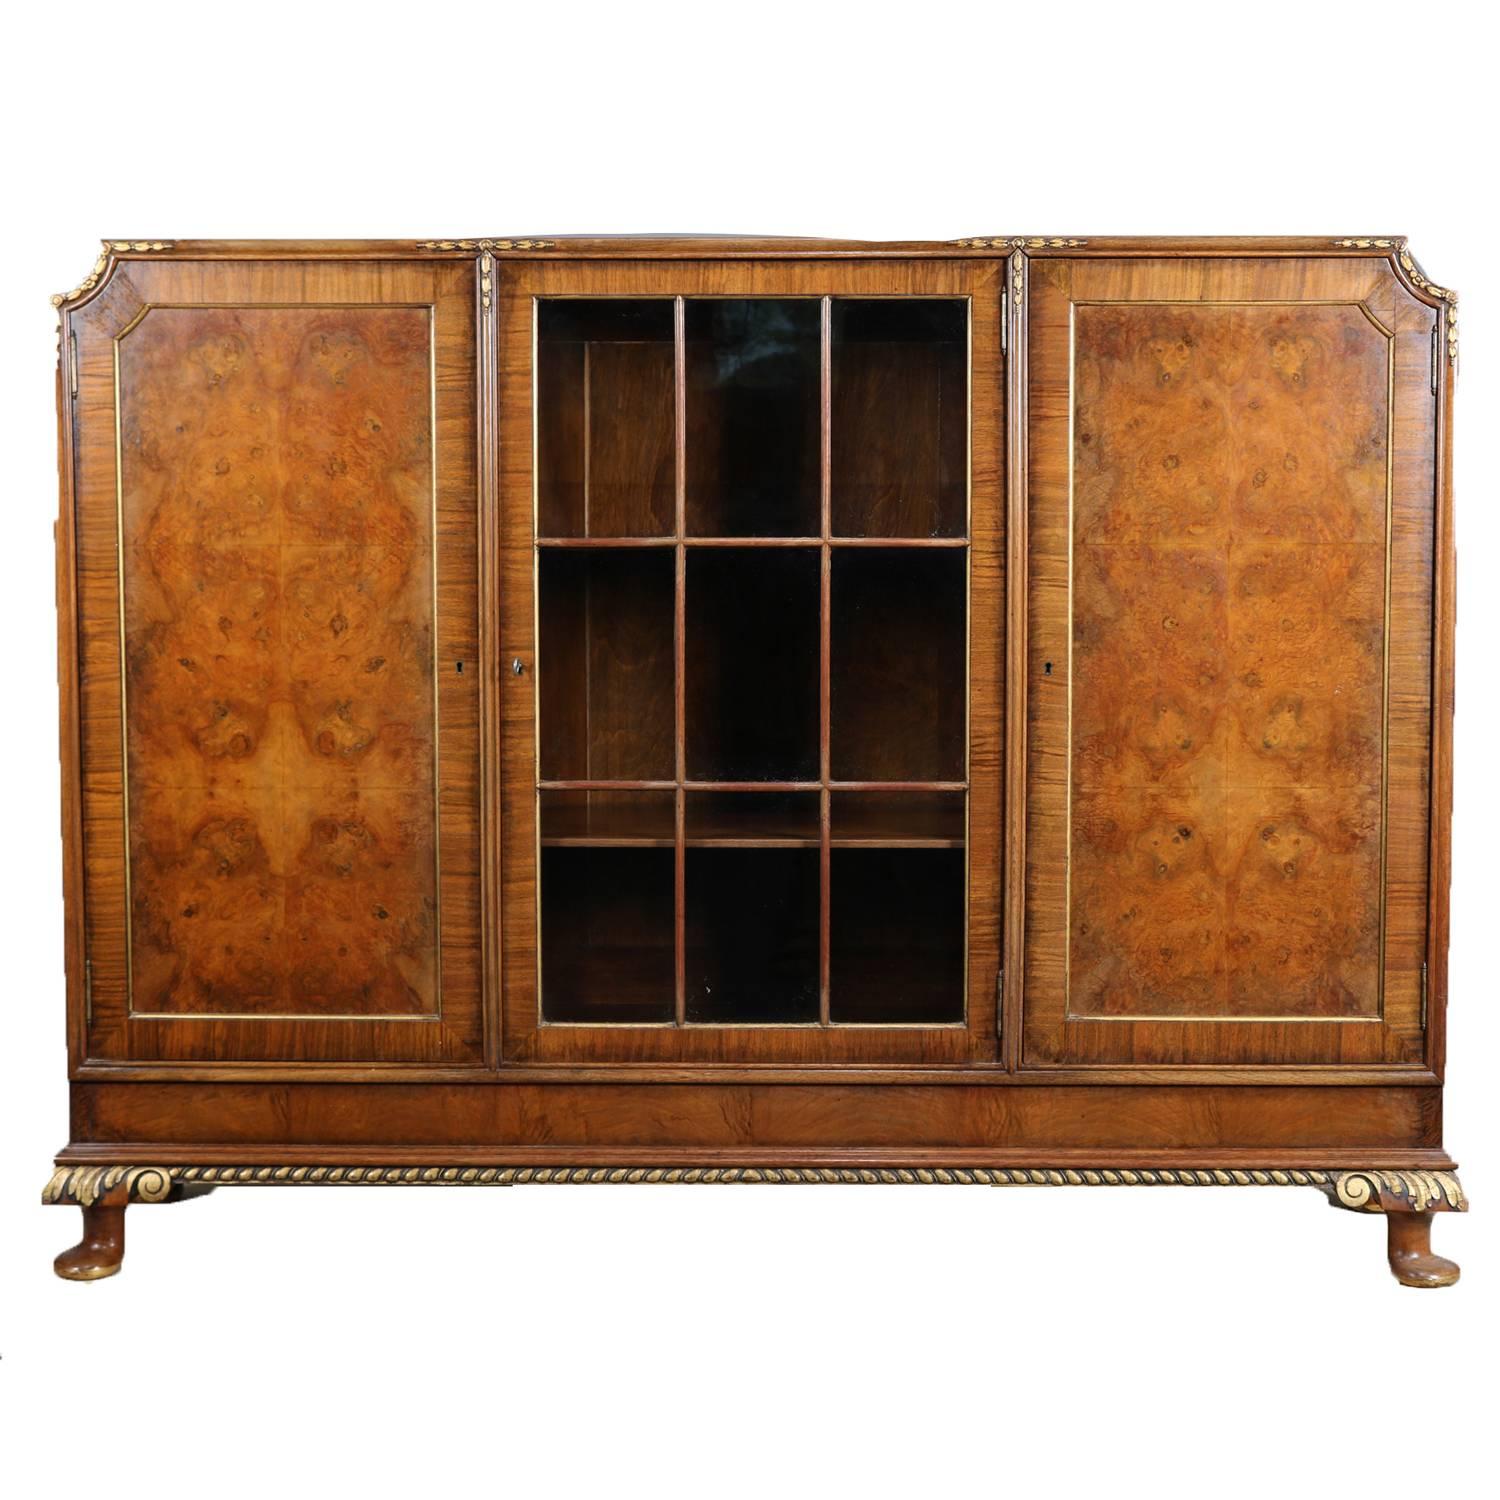 Antique French Louis XV style bookcase features case with upper trim having gilt bellflowers above central glass door flanked by gilt banded doors with burl reserves all opening to reveal three chambers each with adjustable shelving over carved and